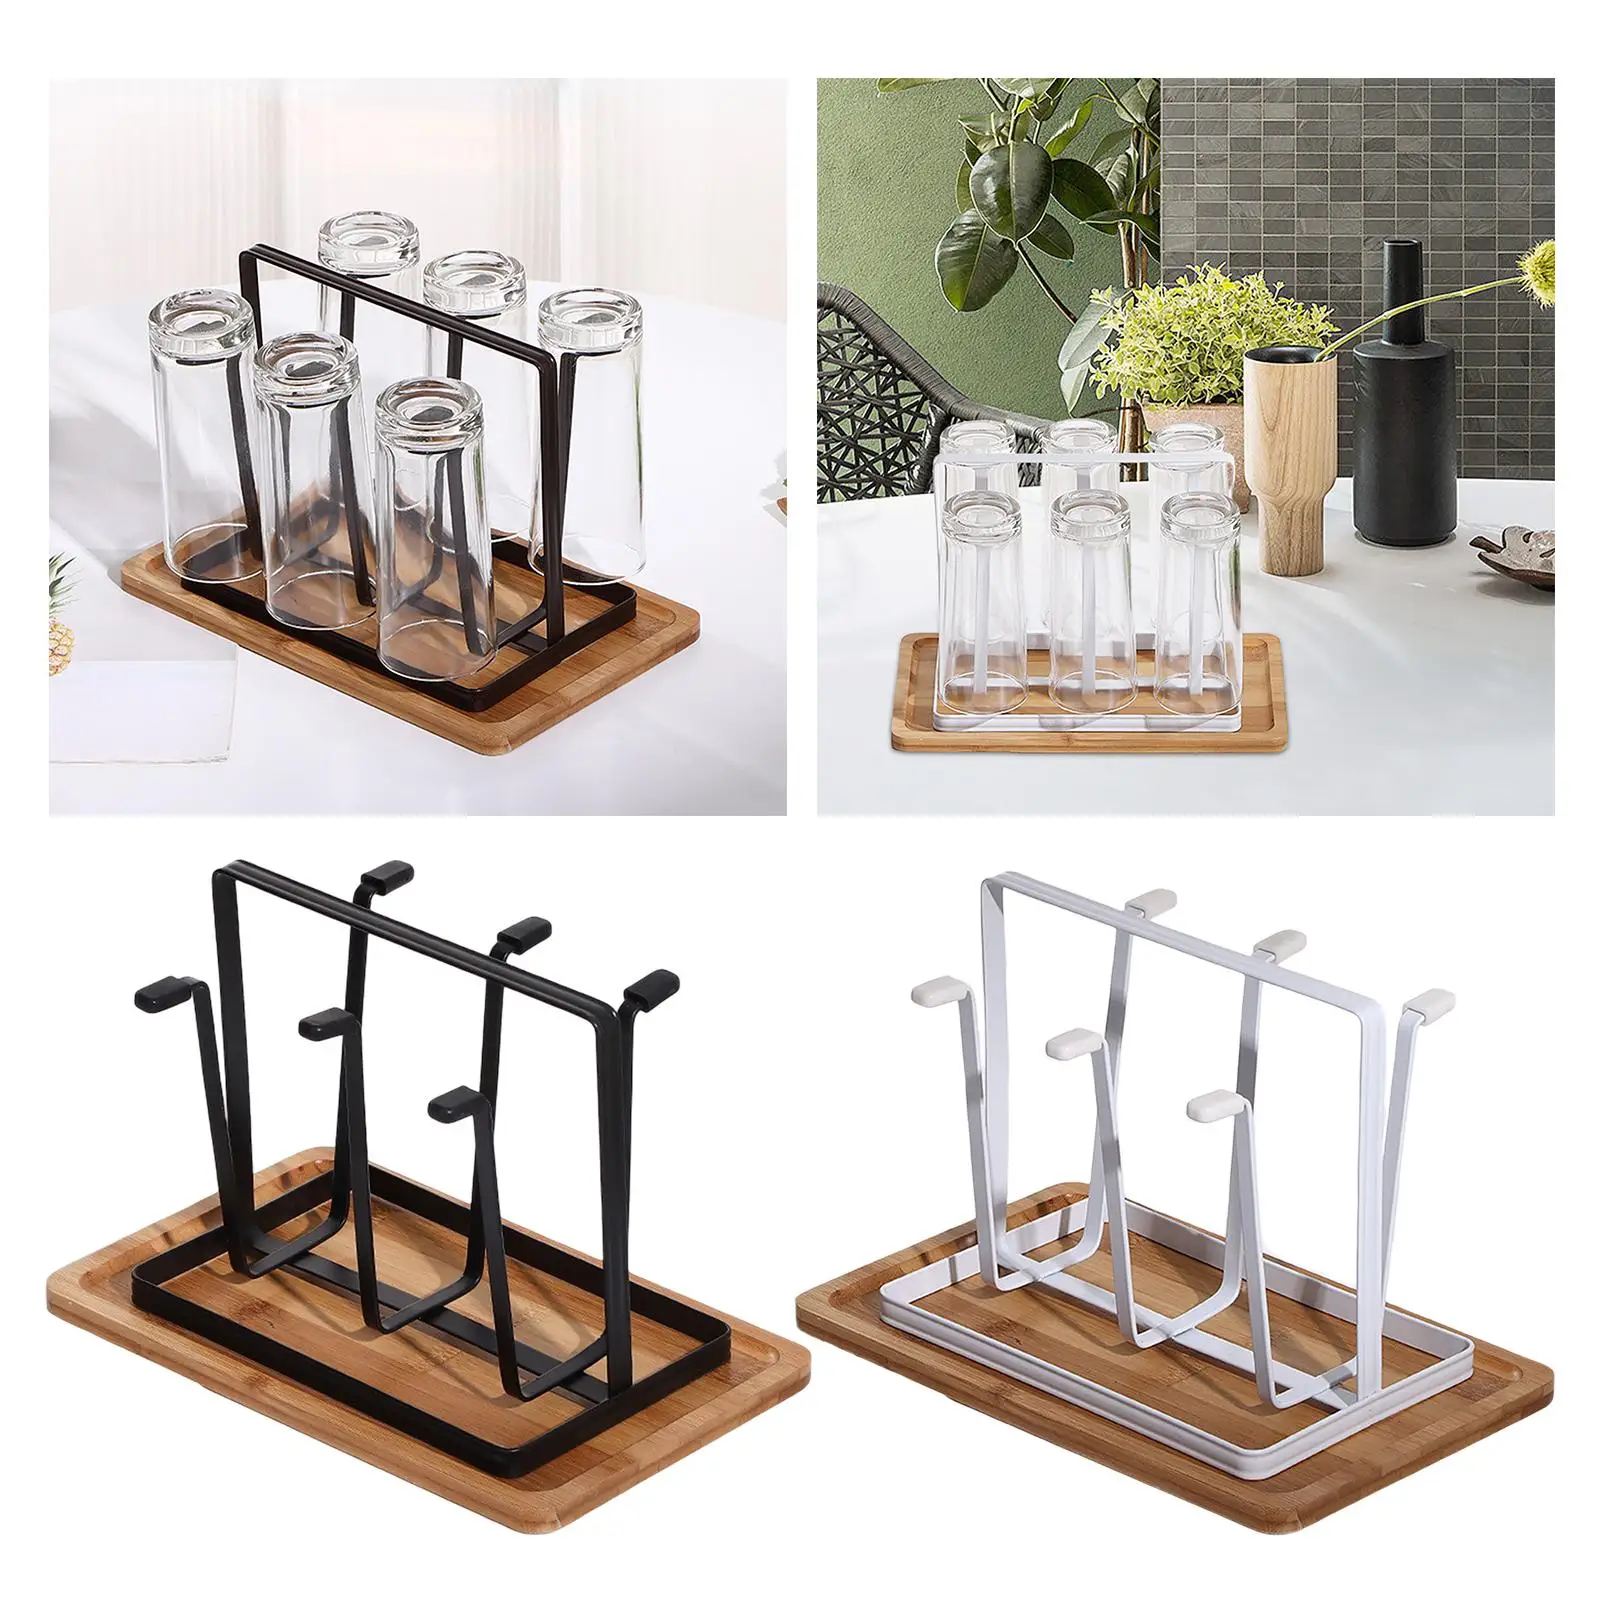 Coffee Mug Rack 6 Cup Holder Stylish Tea Cup Storage Shelf with Tray Cup Drying Rack for Kitchen Countertop Jars Mugs Home